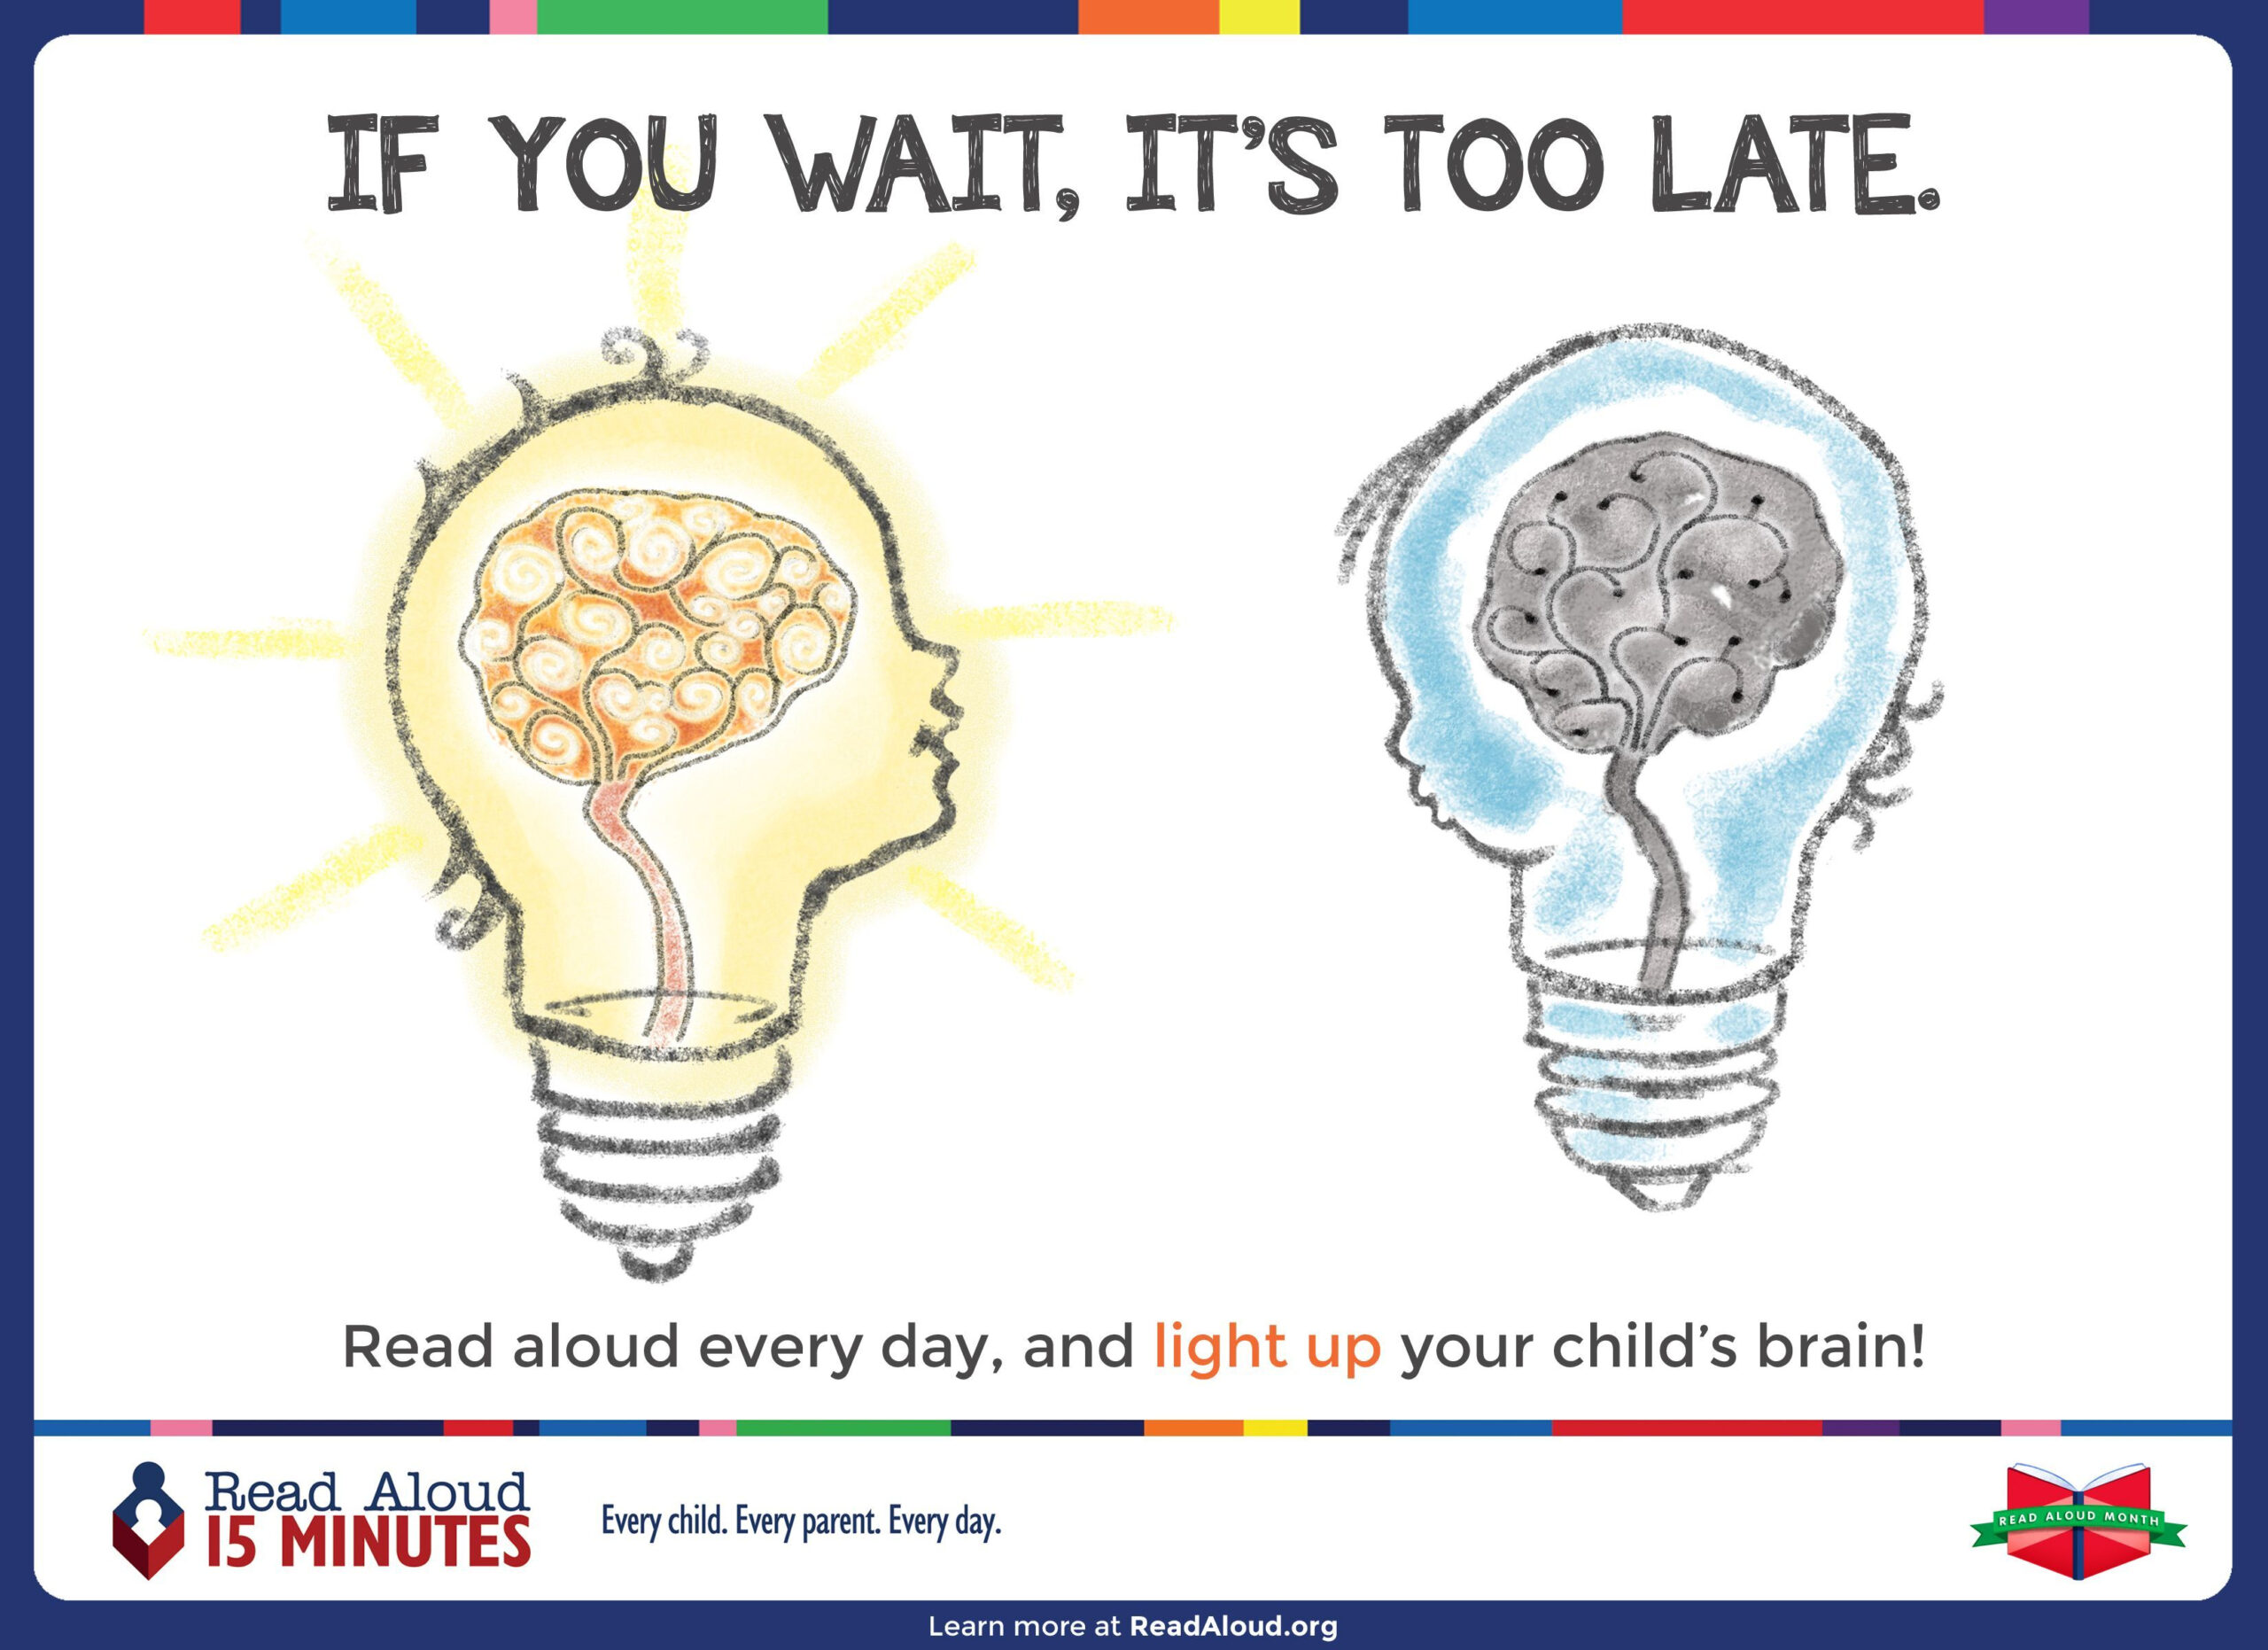 Light Up Your Child's Brain! Read Aloud 15 Minutes Every